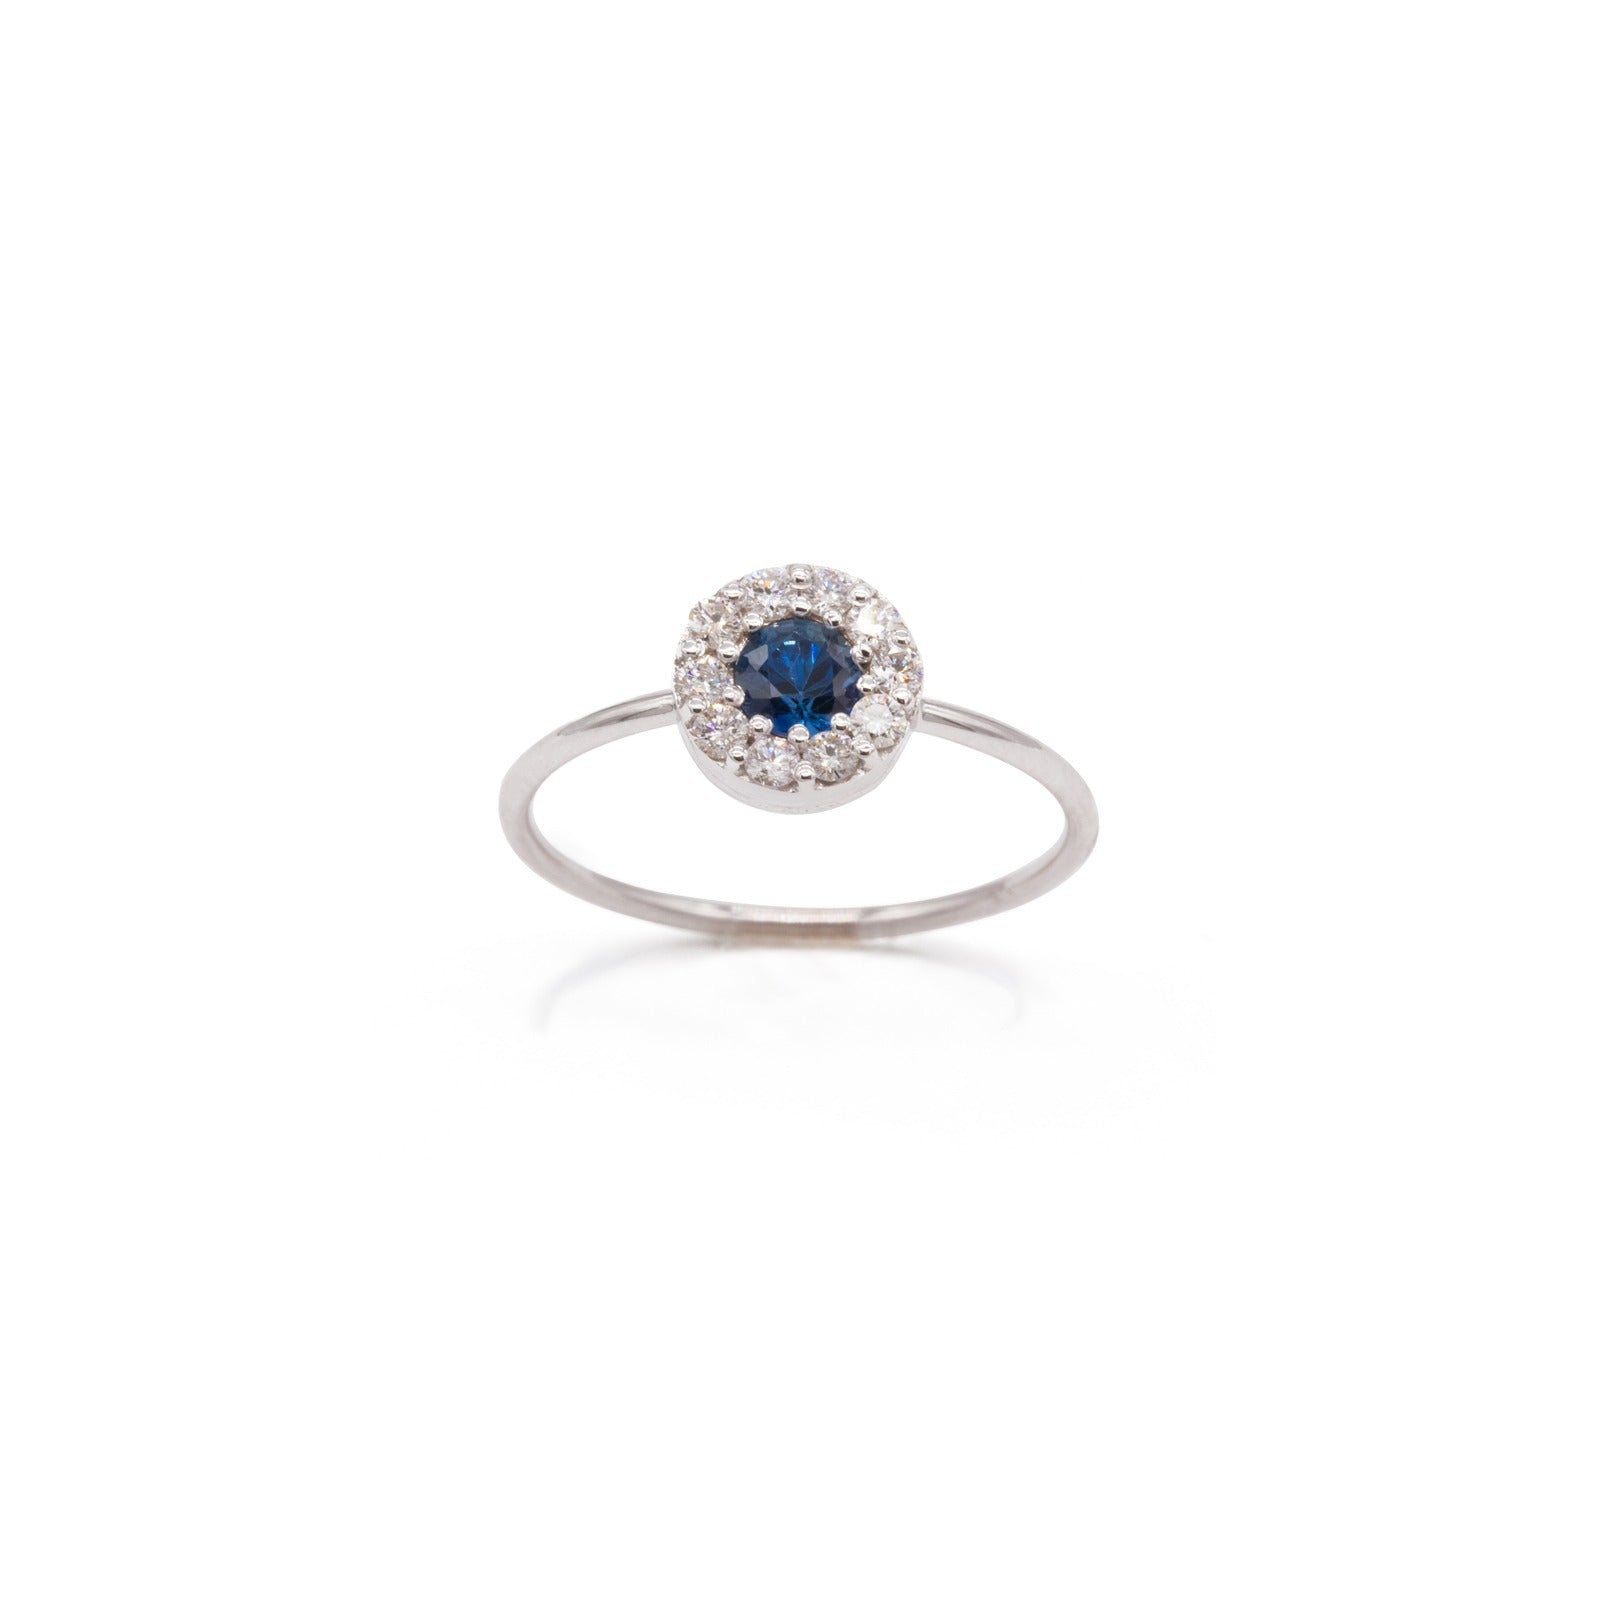 Thin ring with diamond and sapphire ring